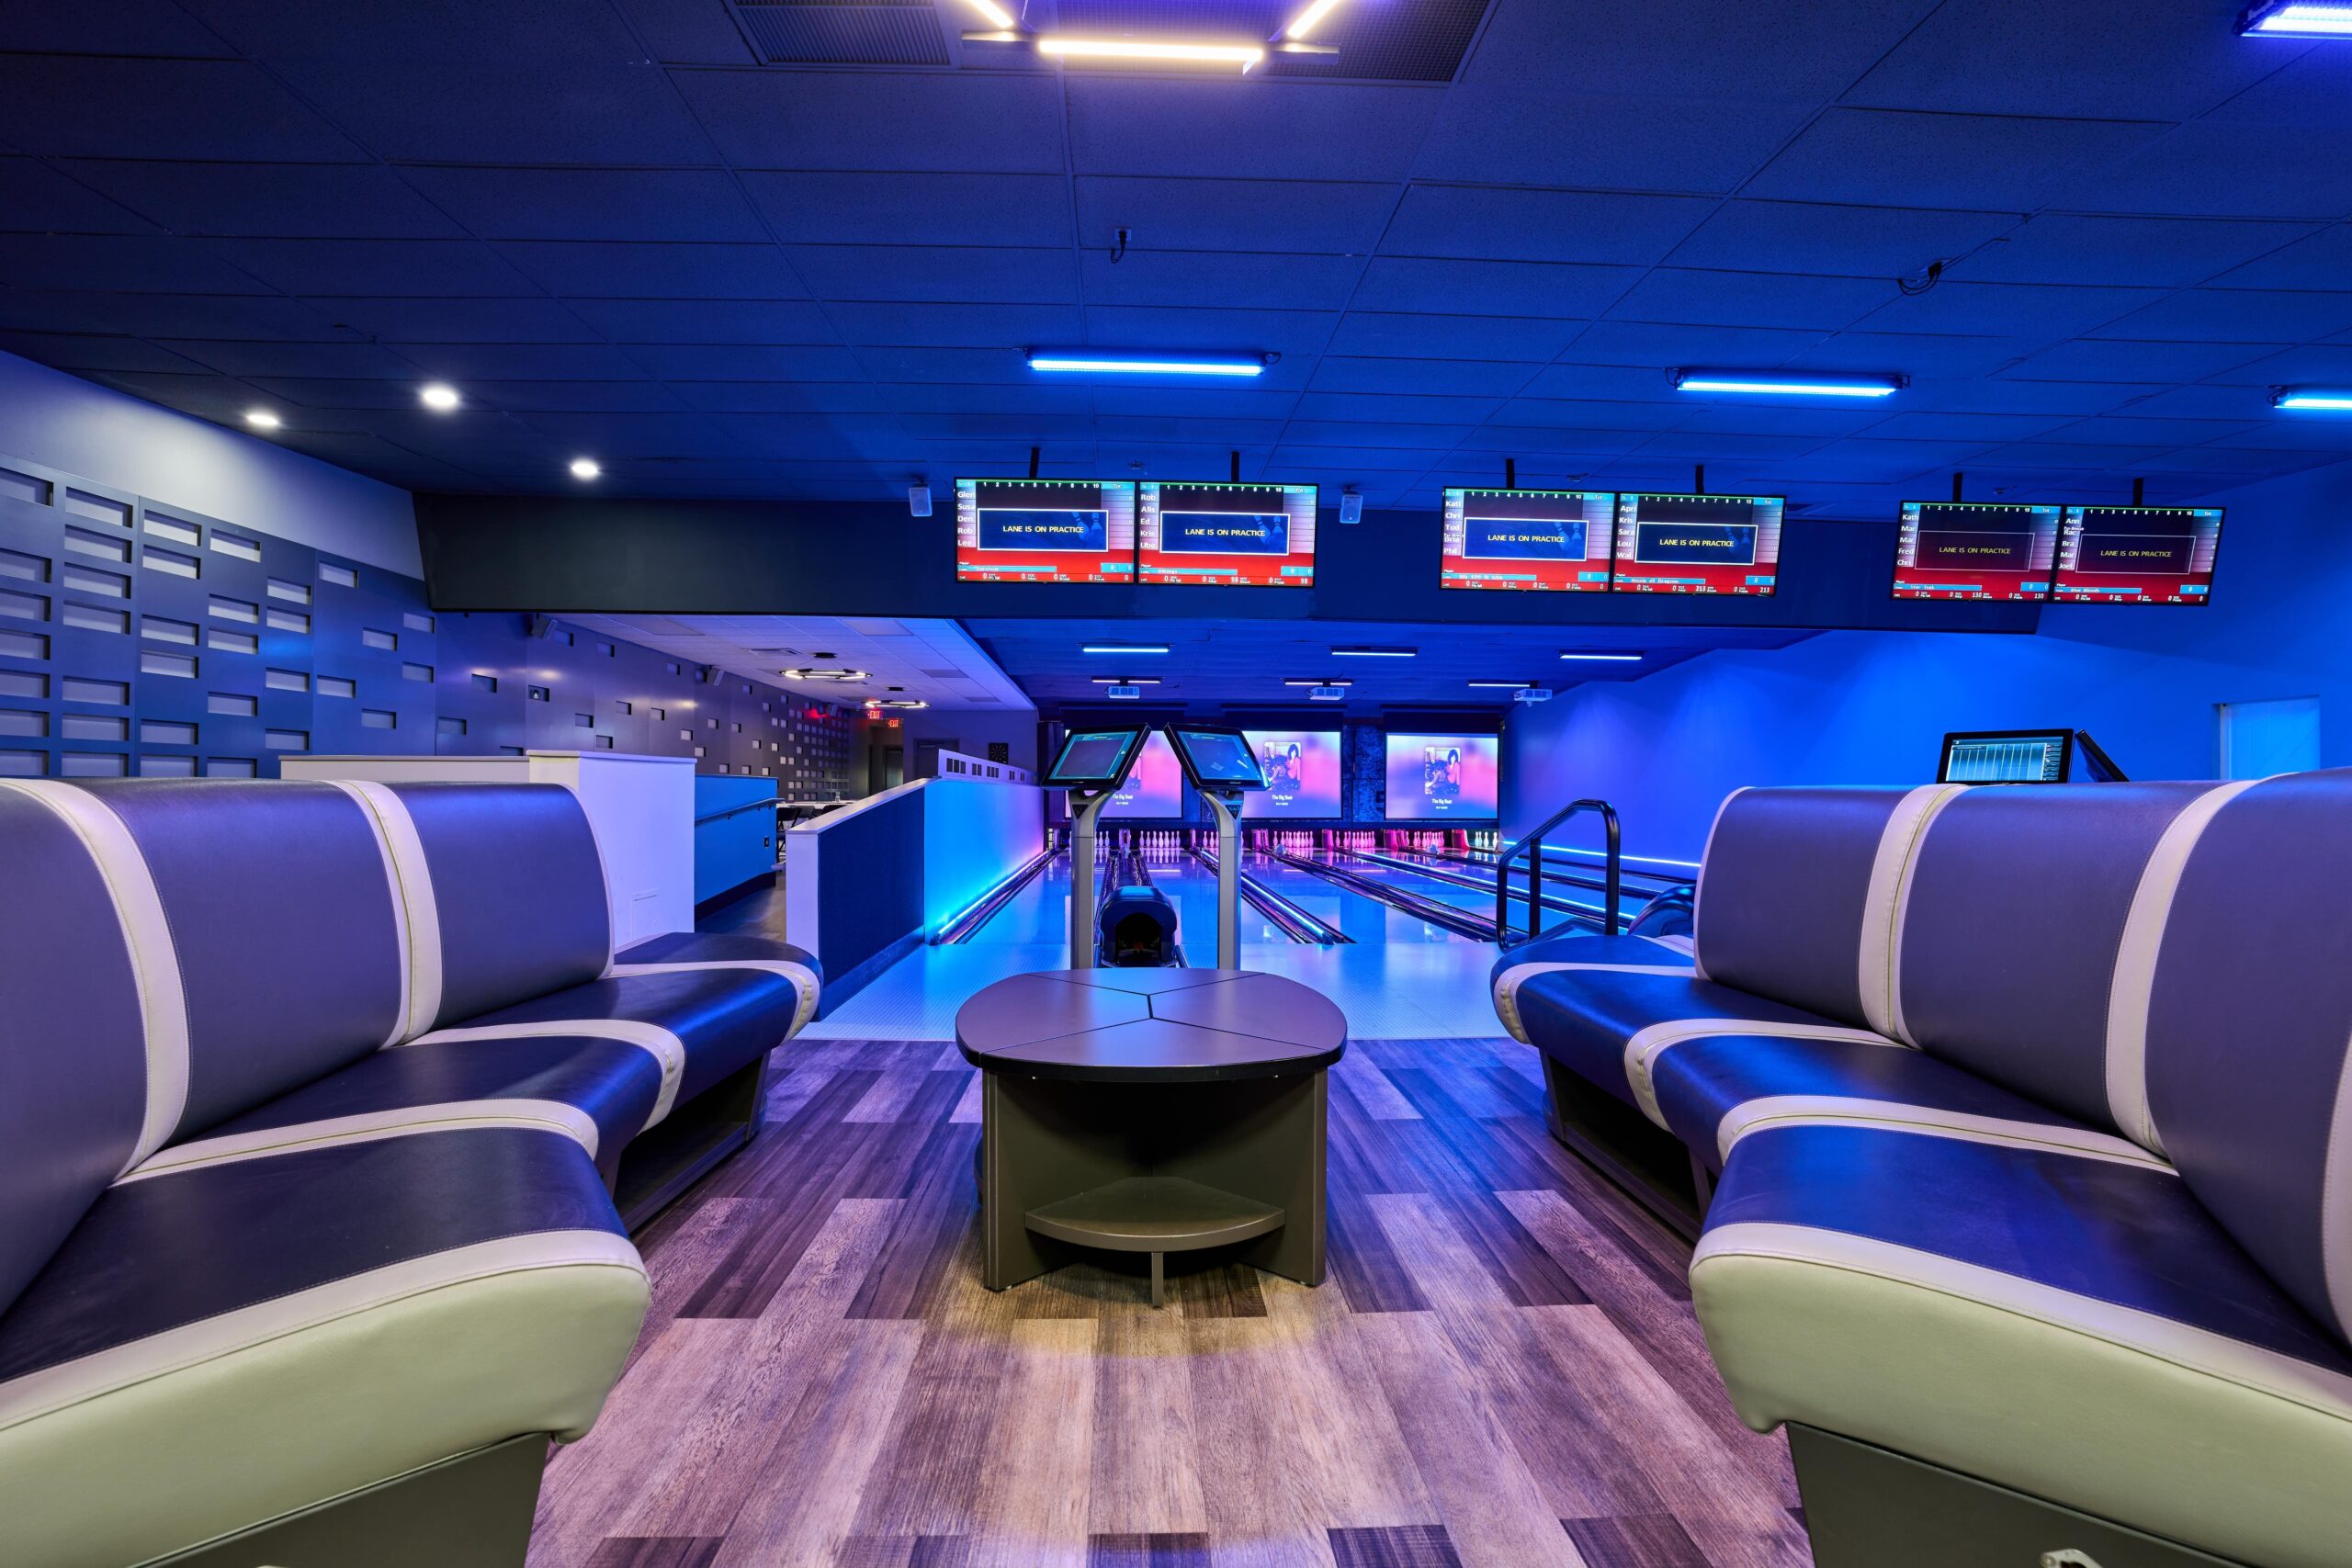 Strike Up Some Fun: Corporate Team Building with a Memorable Bowling Event